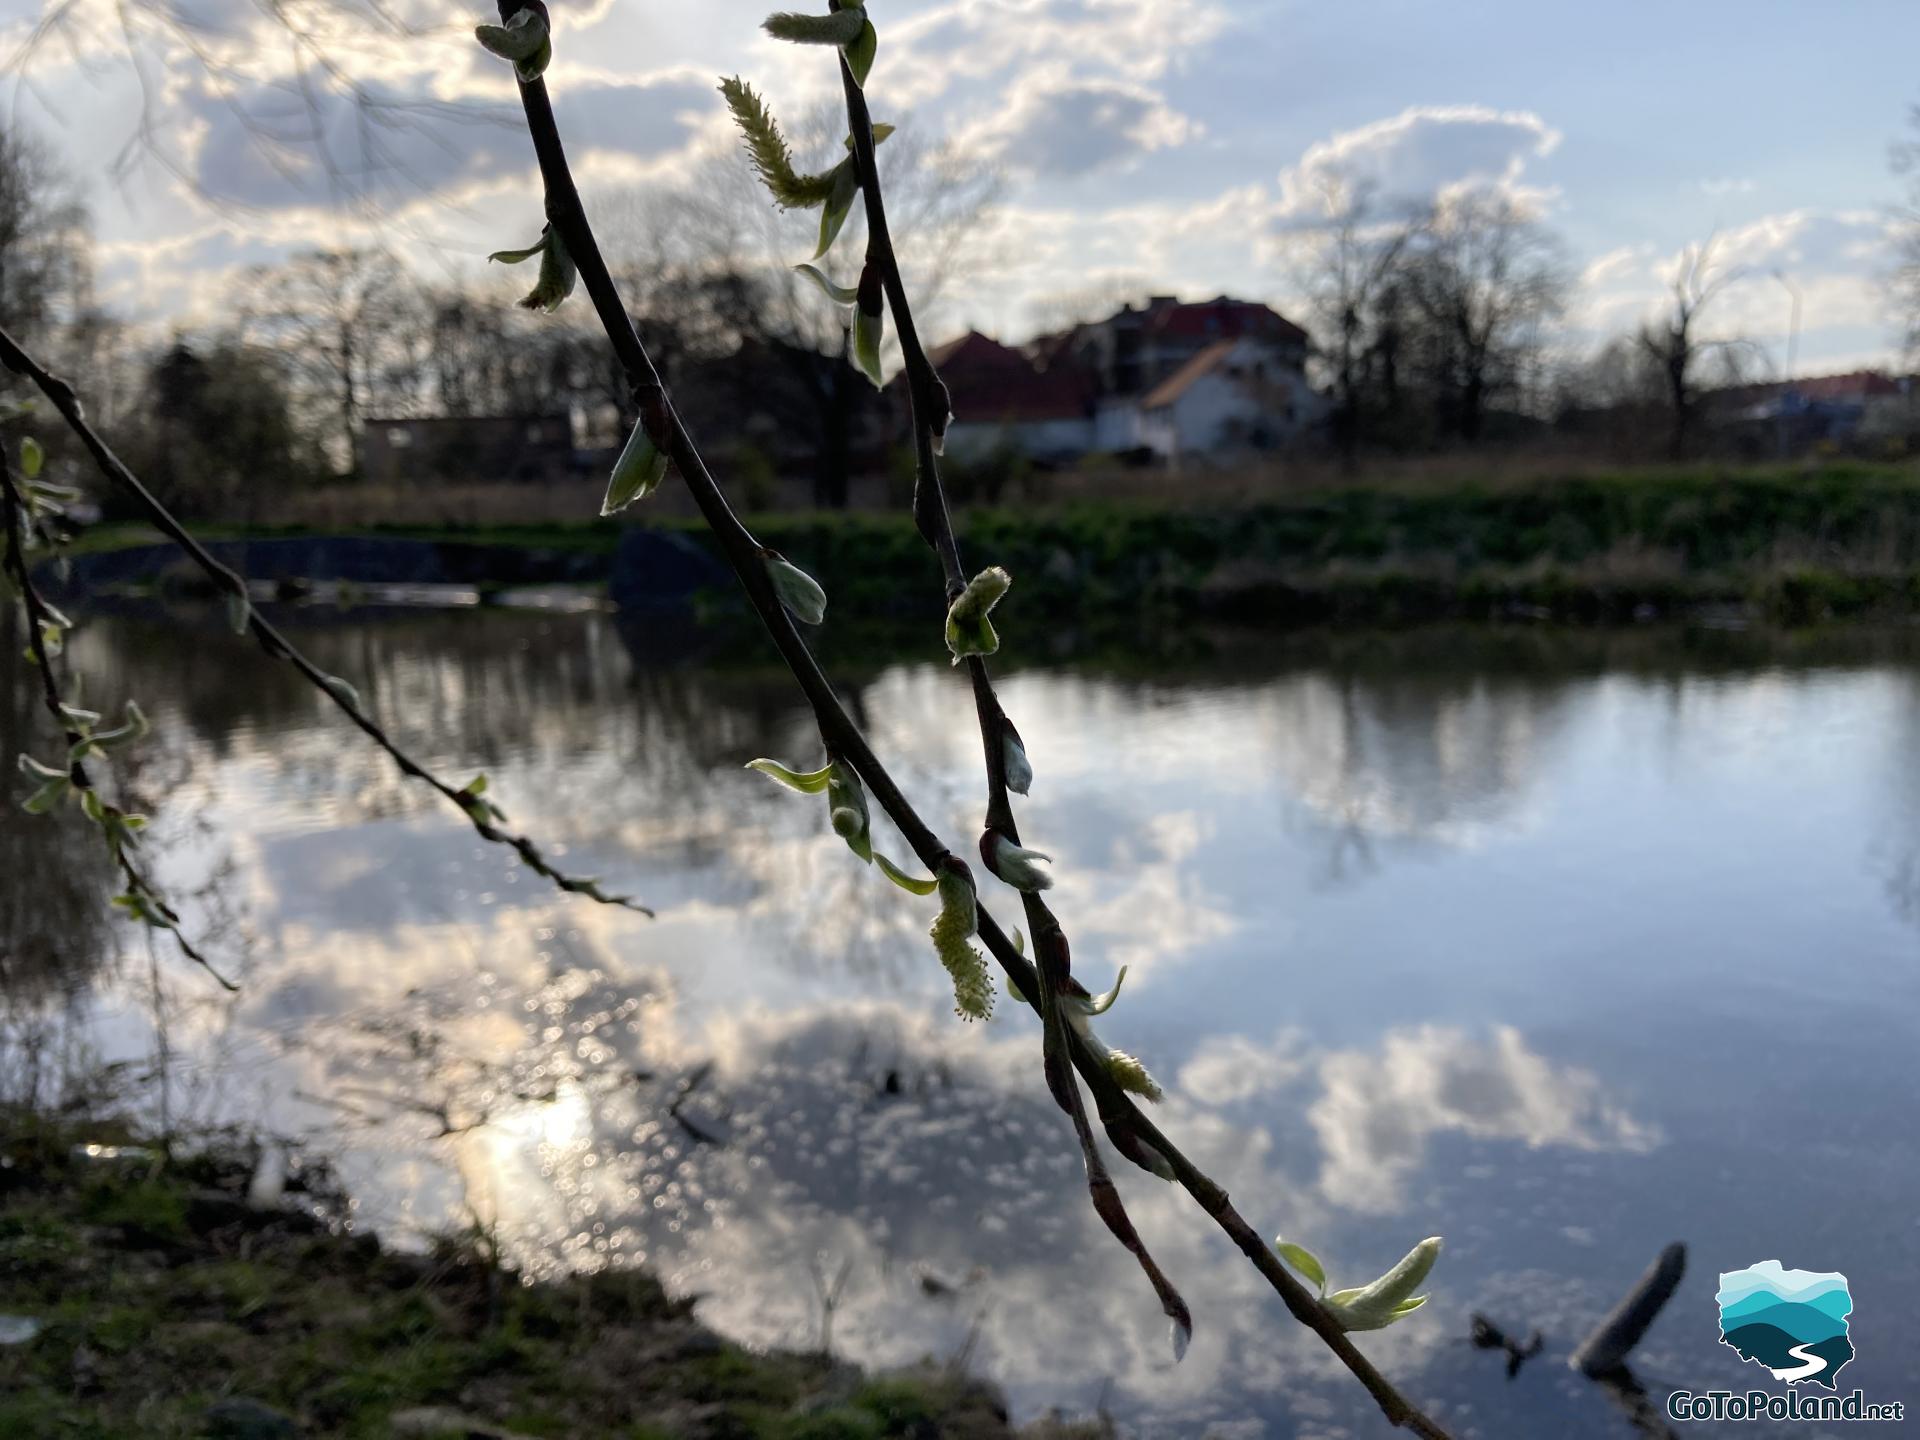 Small buds on two tree branches, a river in the background